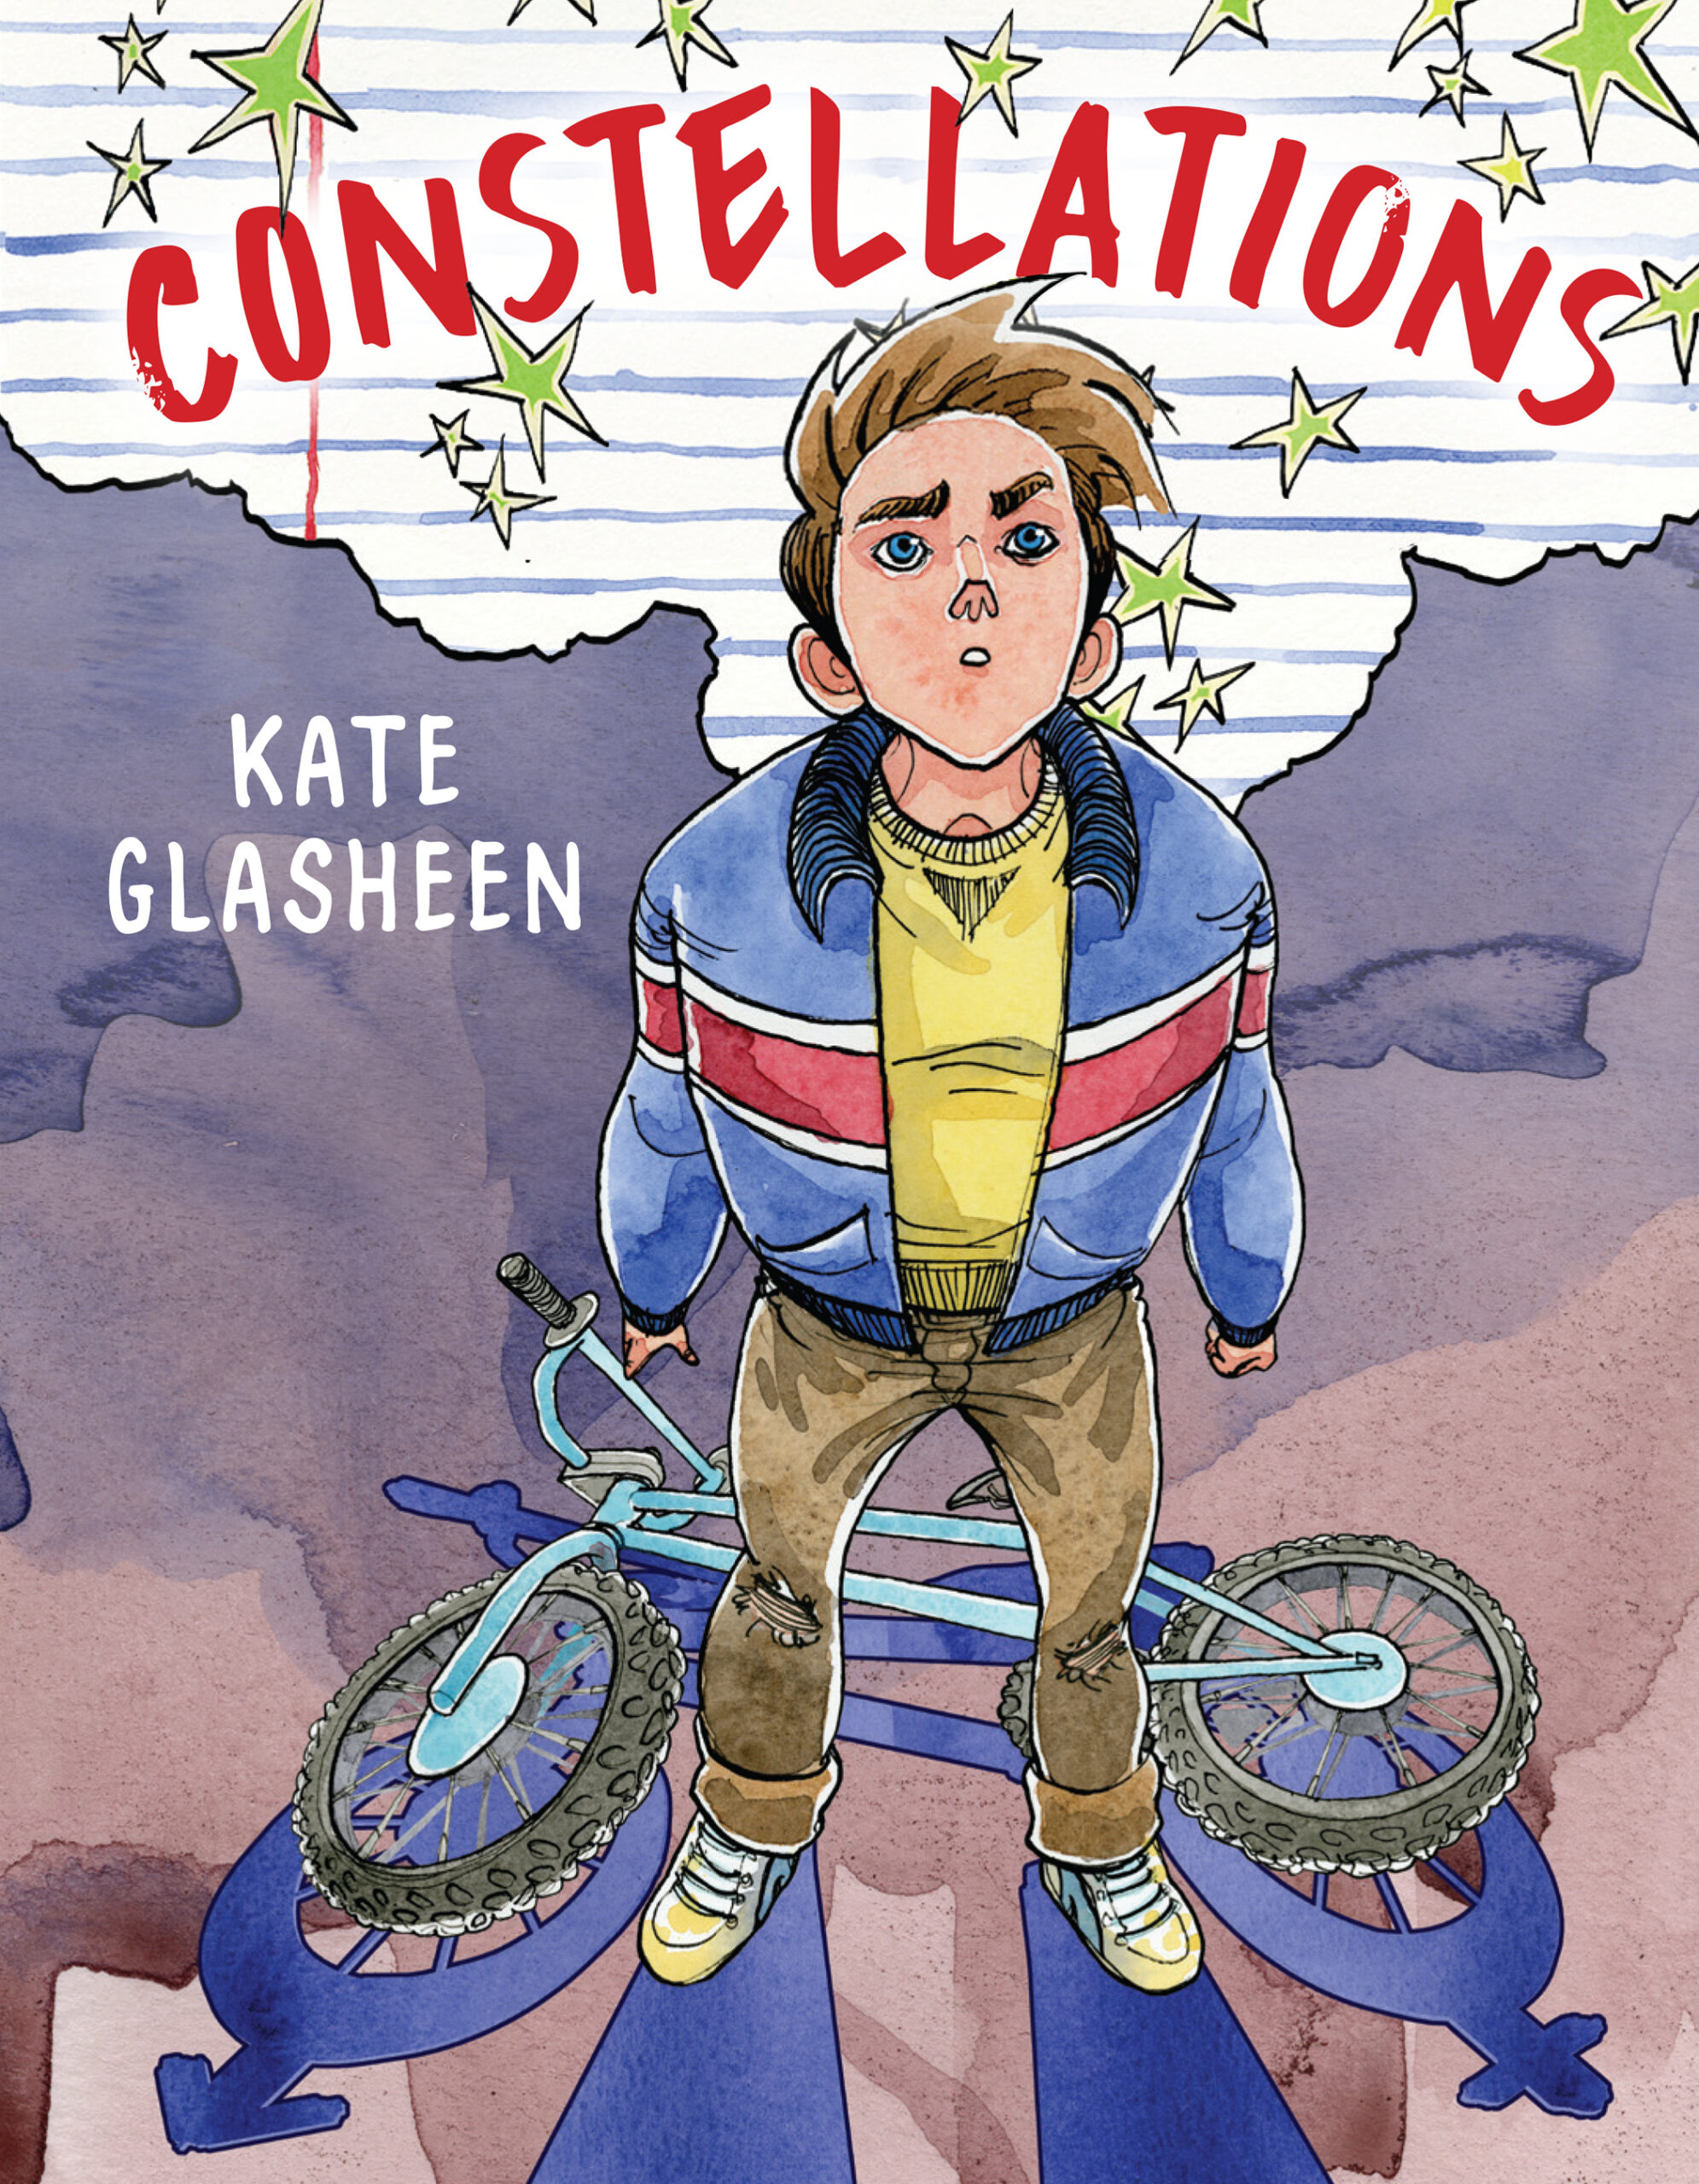 Evolution is Self Portrait, a guest post by Kate Glasheen